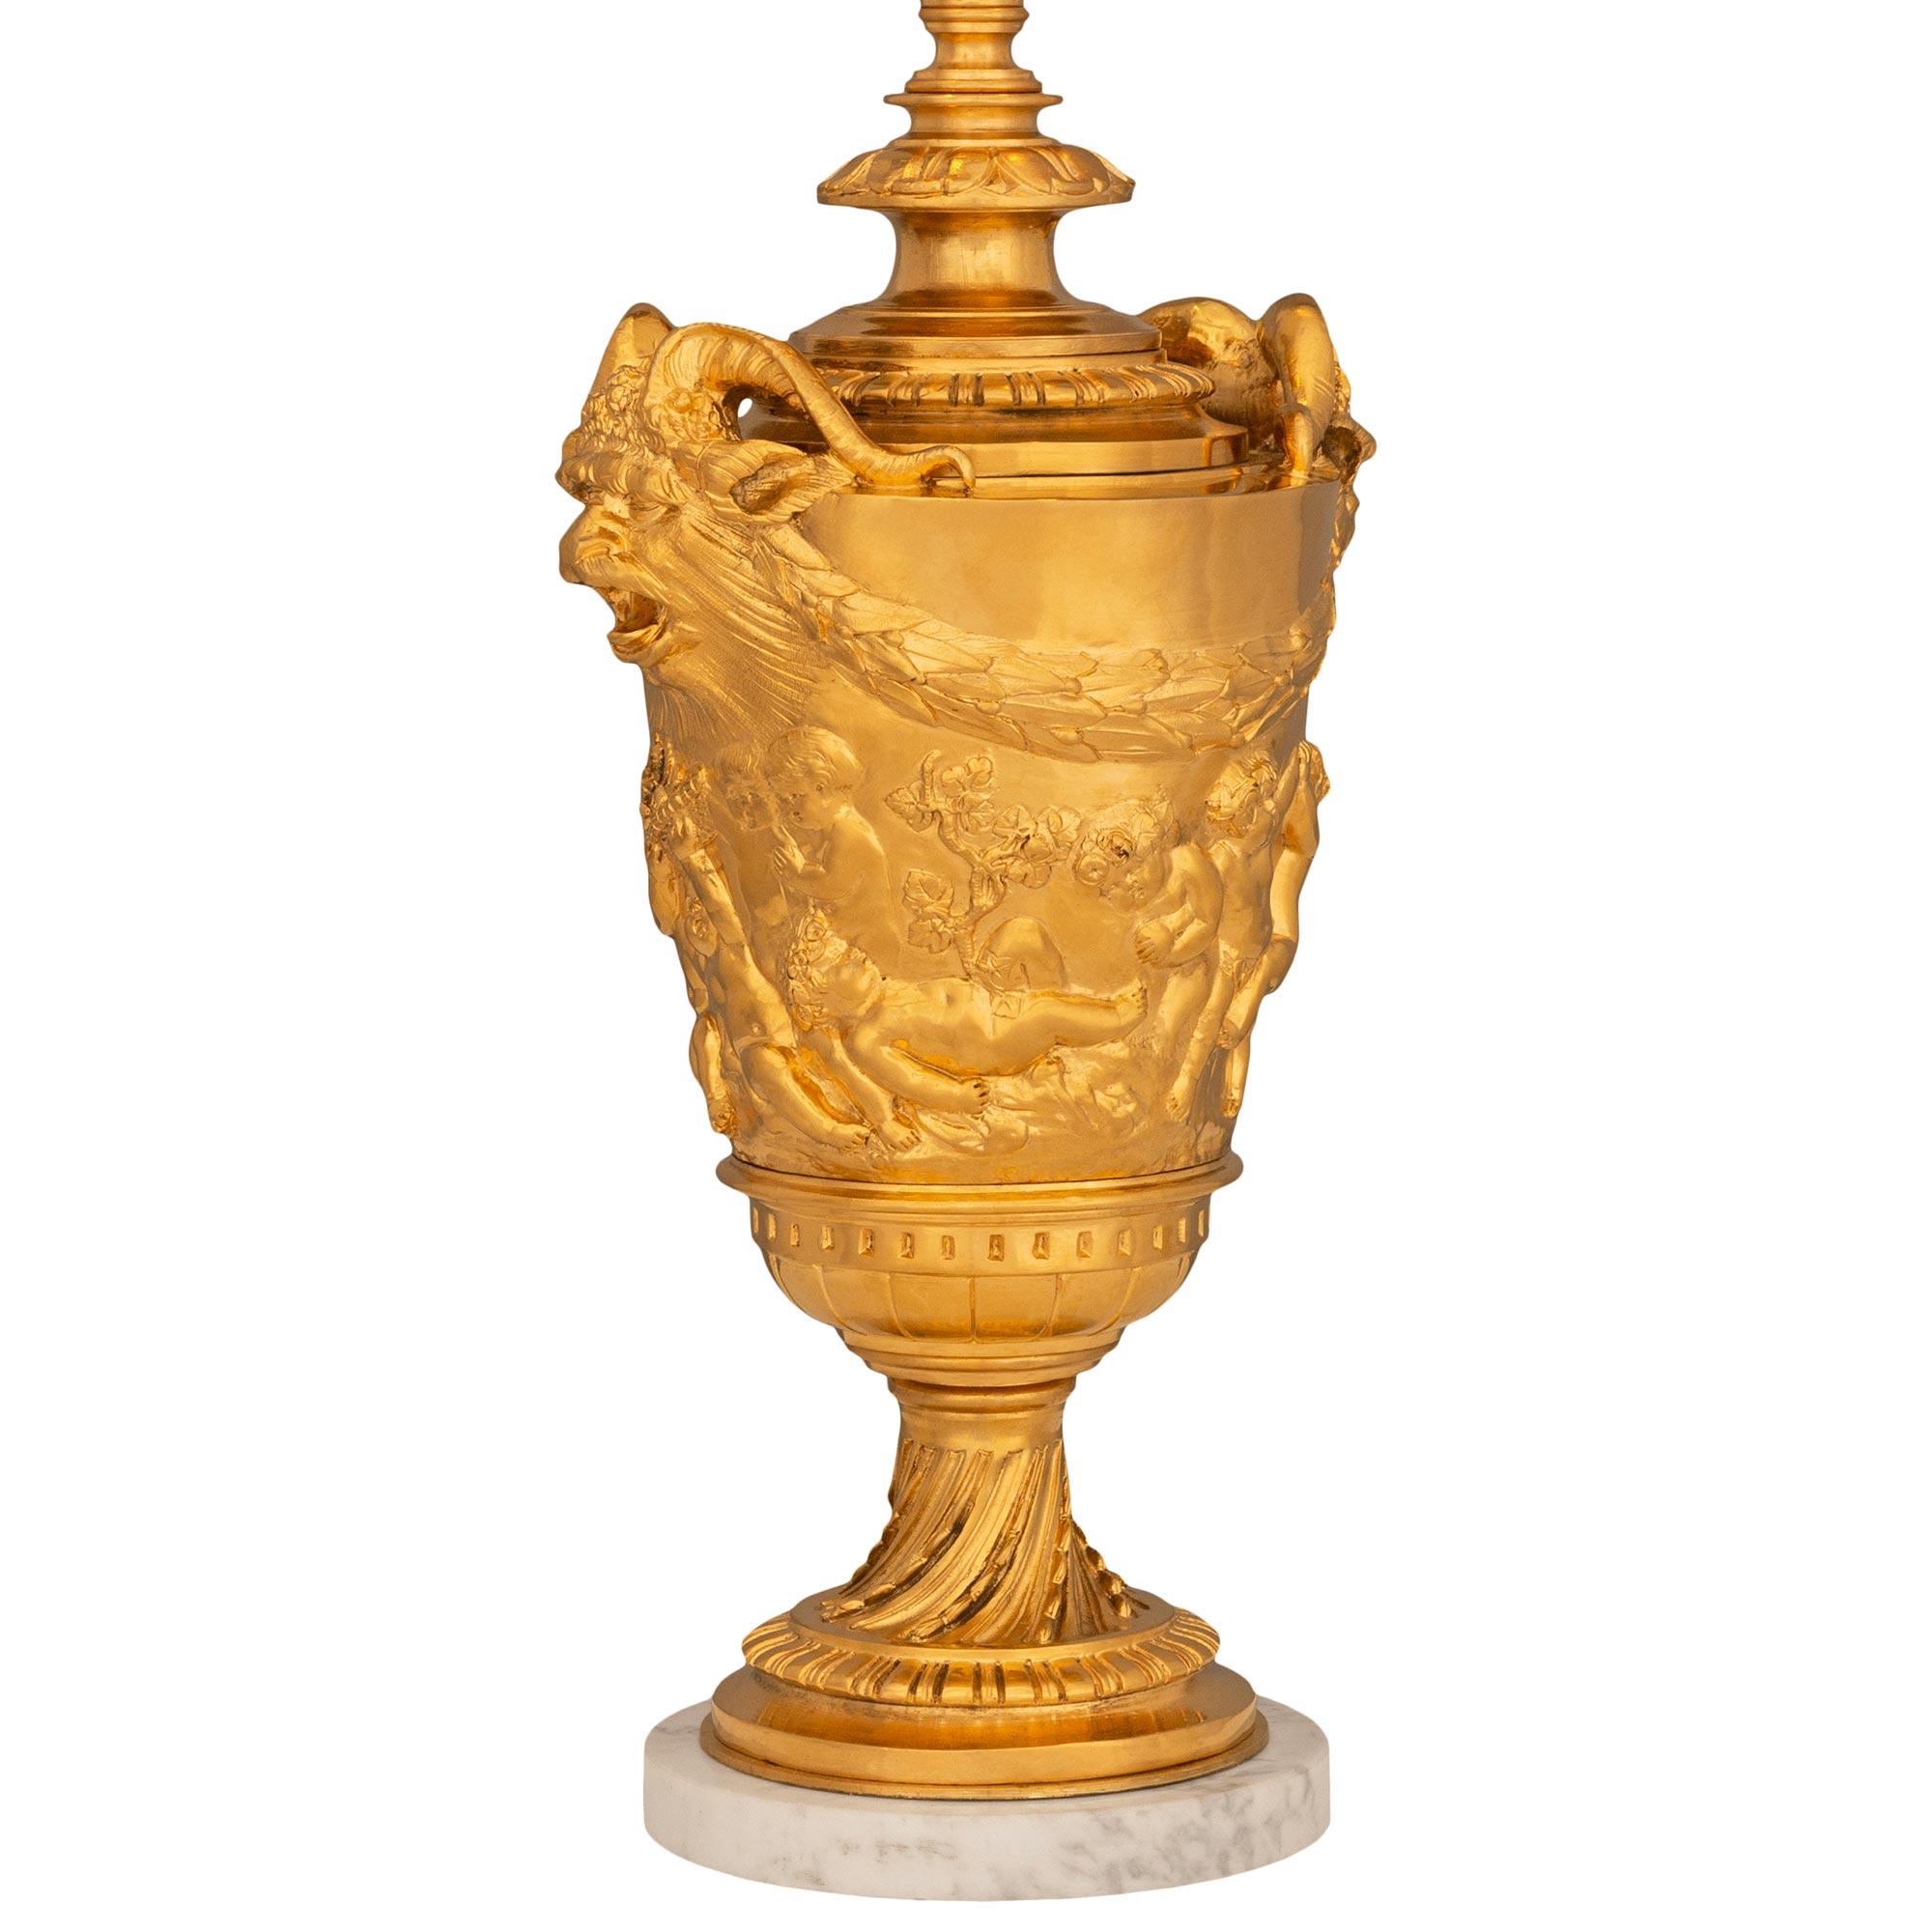 A stunning and high quality French 19th century Louis XVI st. Ormolu and Calacatta marble lamp. This beautiful lamp is raised on a circular Calacatta marble base below a mottled and fluted Ormolu band and spiral fluted socle pedestal. The body